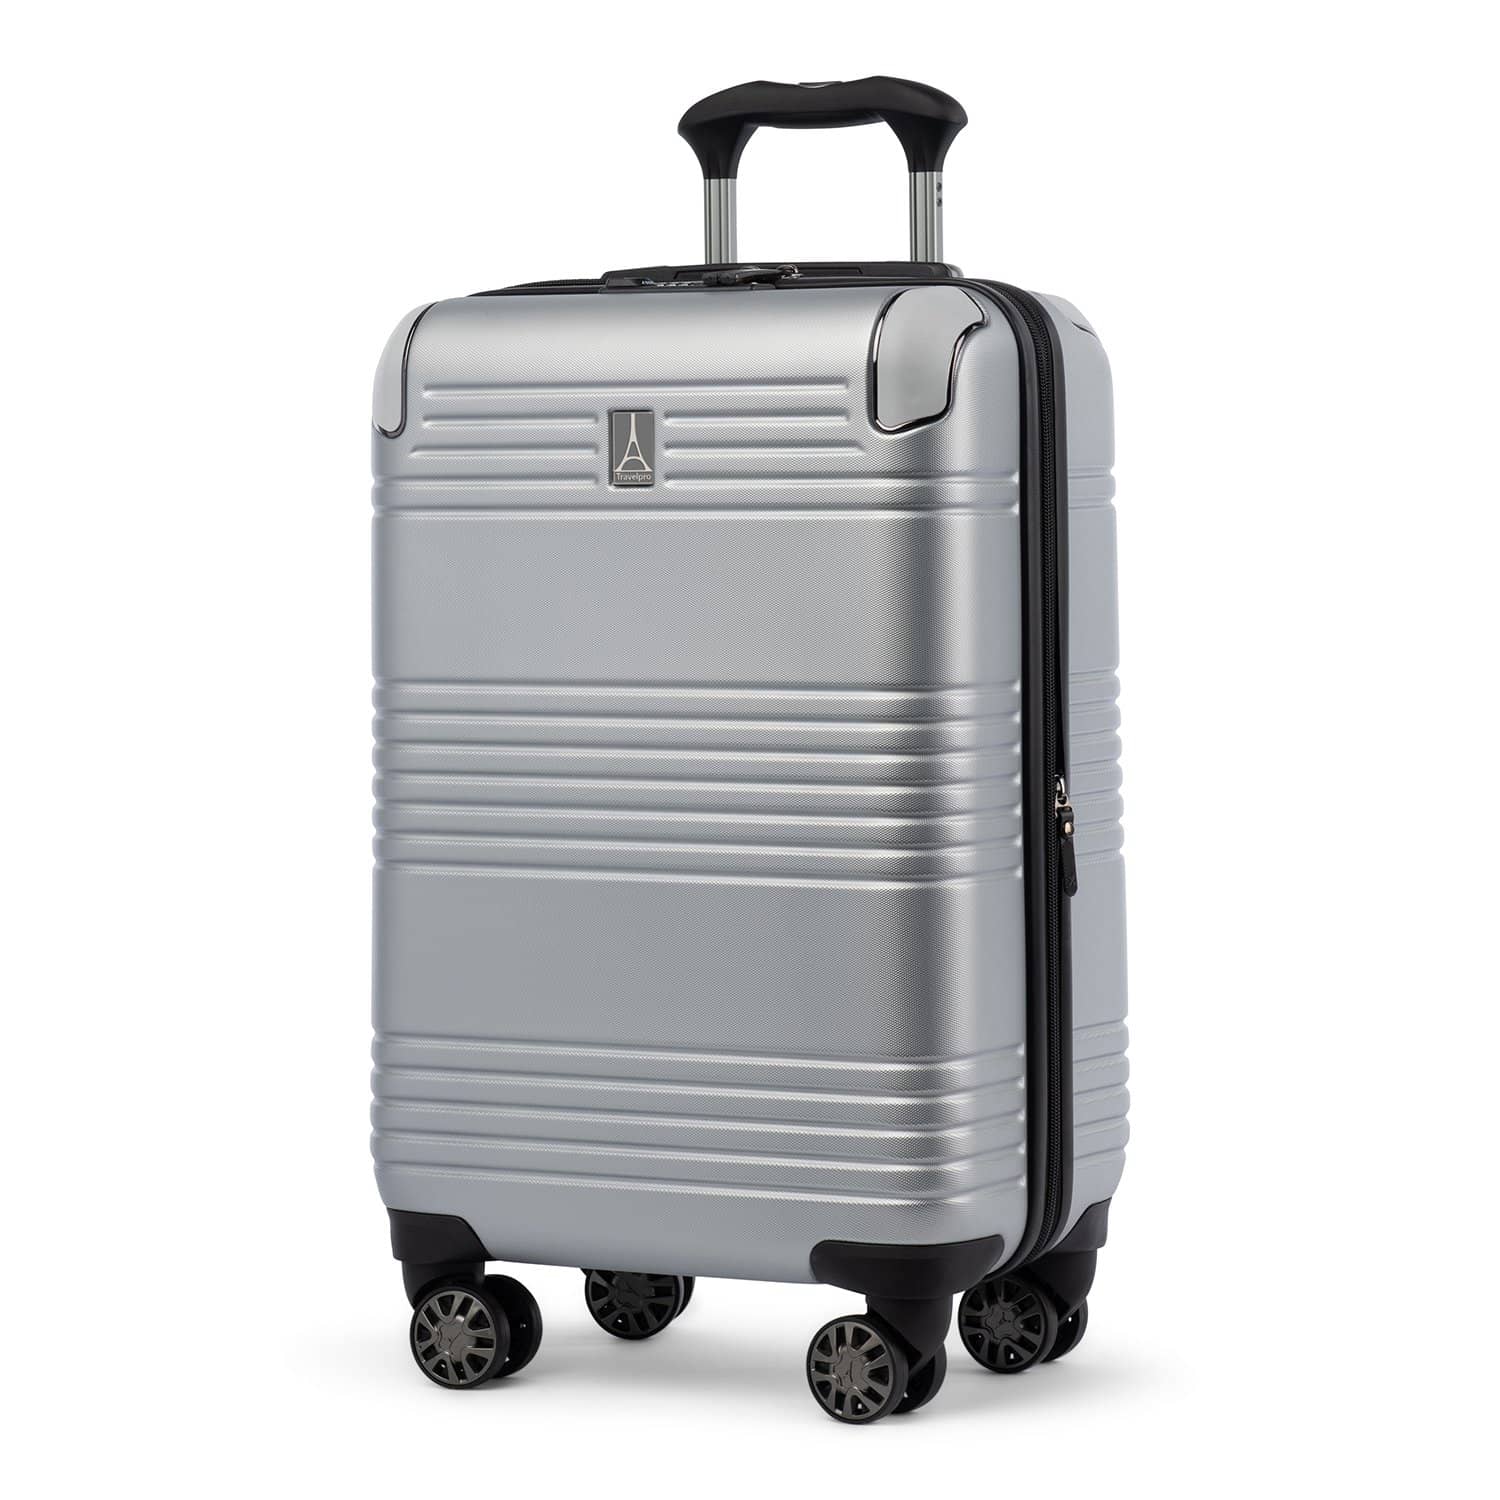 Travelpro RoundTrip Carry-On Luggage /Medium Check-In Hardside Set in White | Travel Suitcase